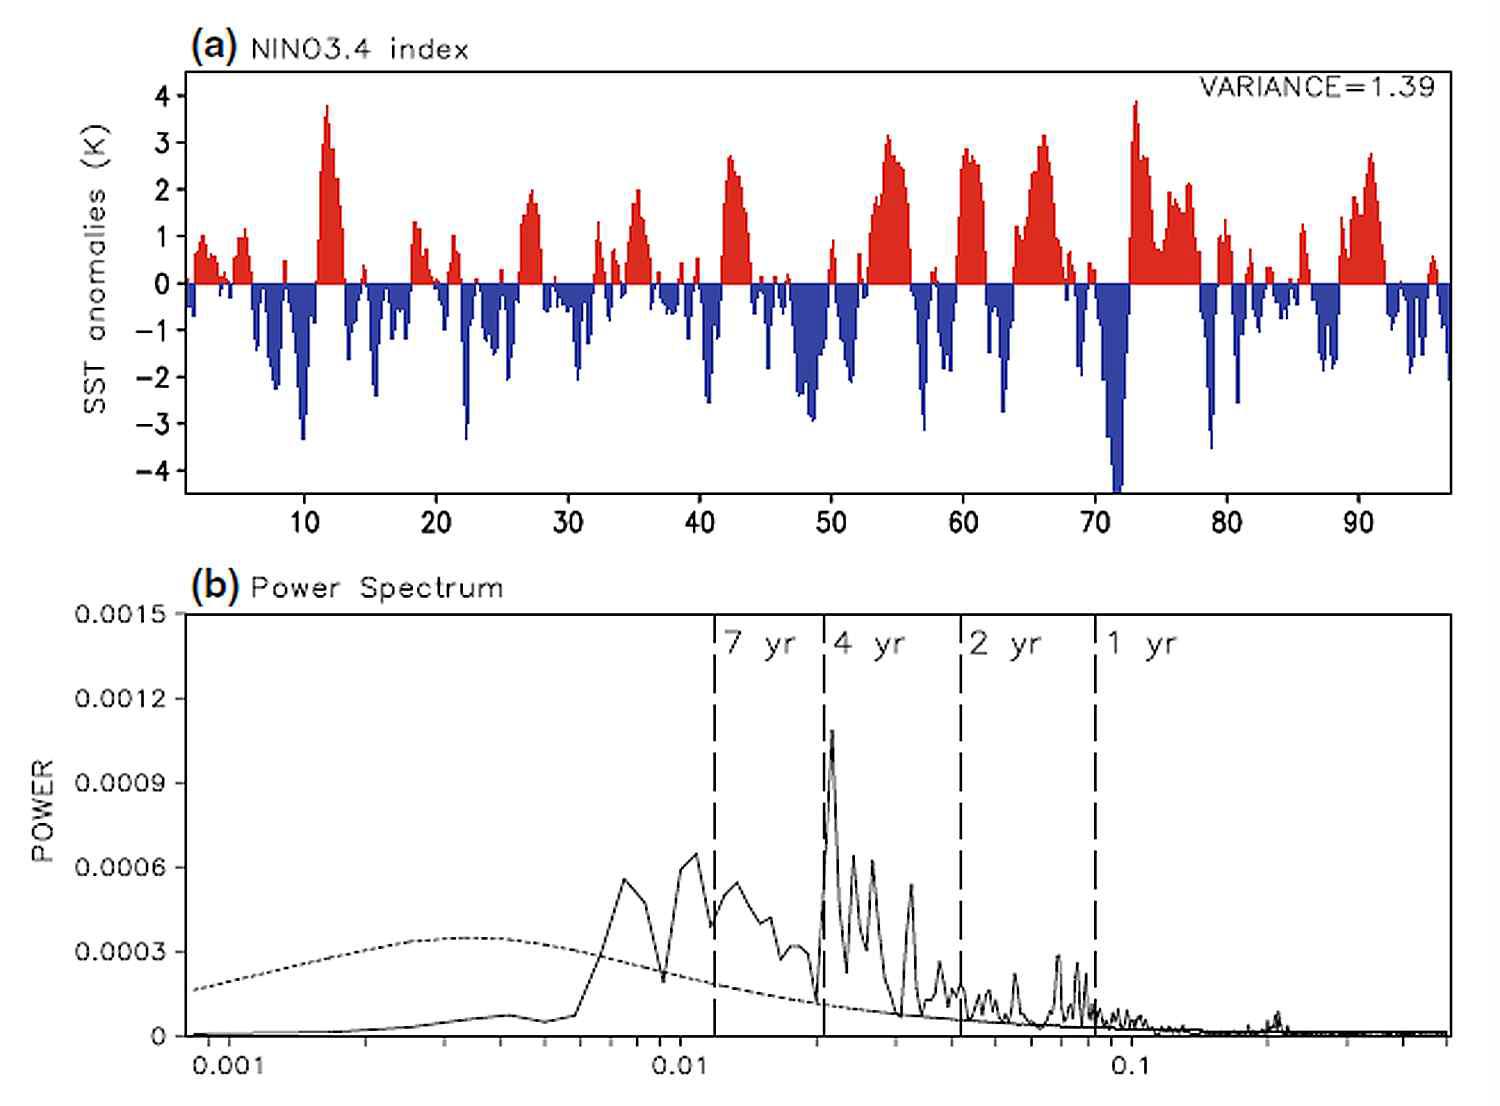 Time series of NINO3.4 SST anomalies of 100-years CZ-SPEEDY simulations b). Power-spectrum of the index